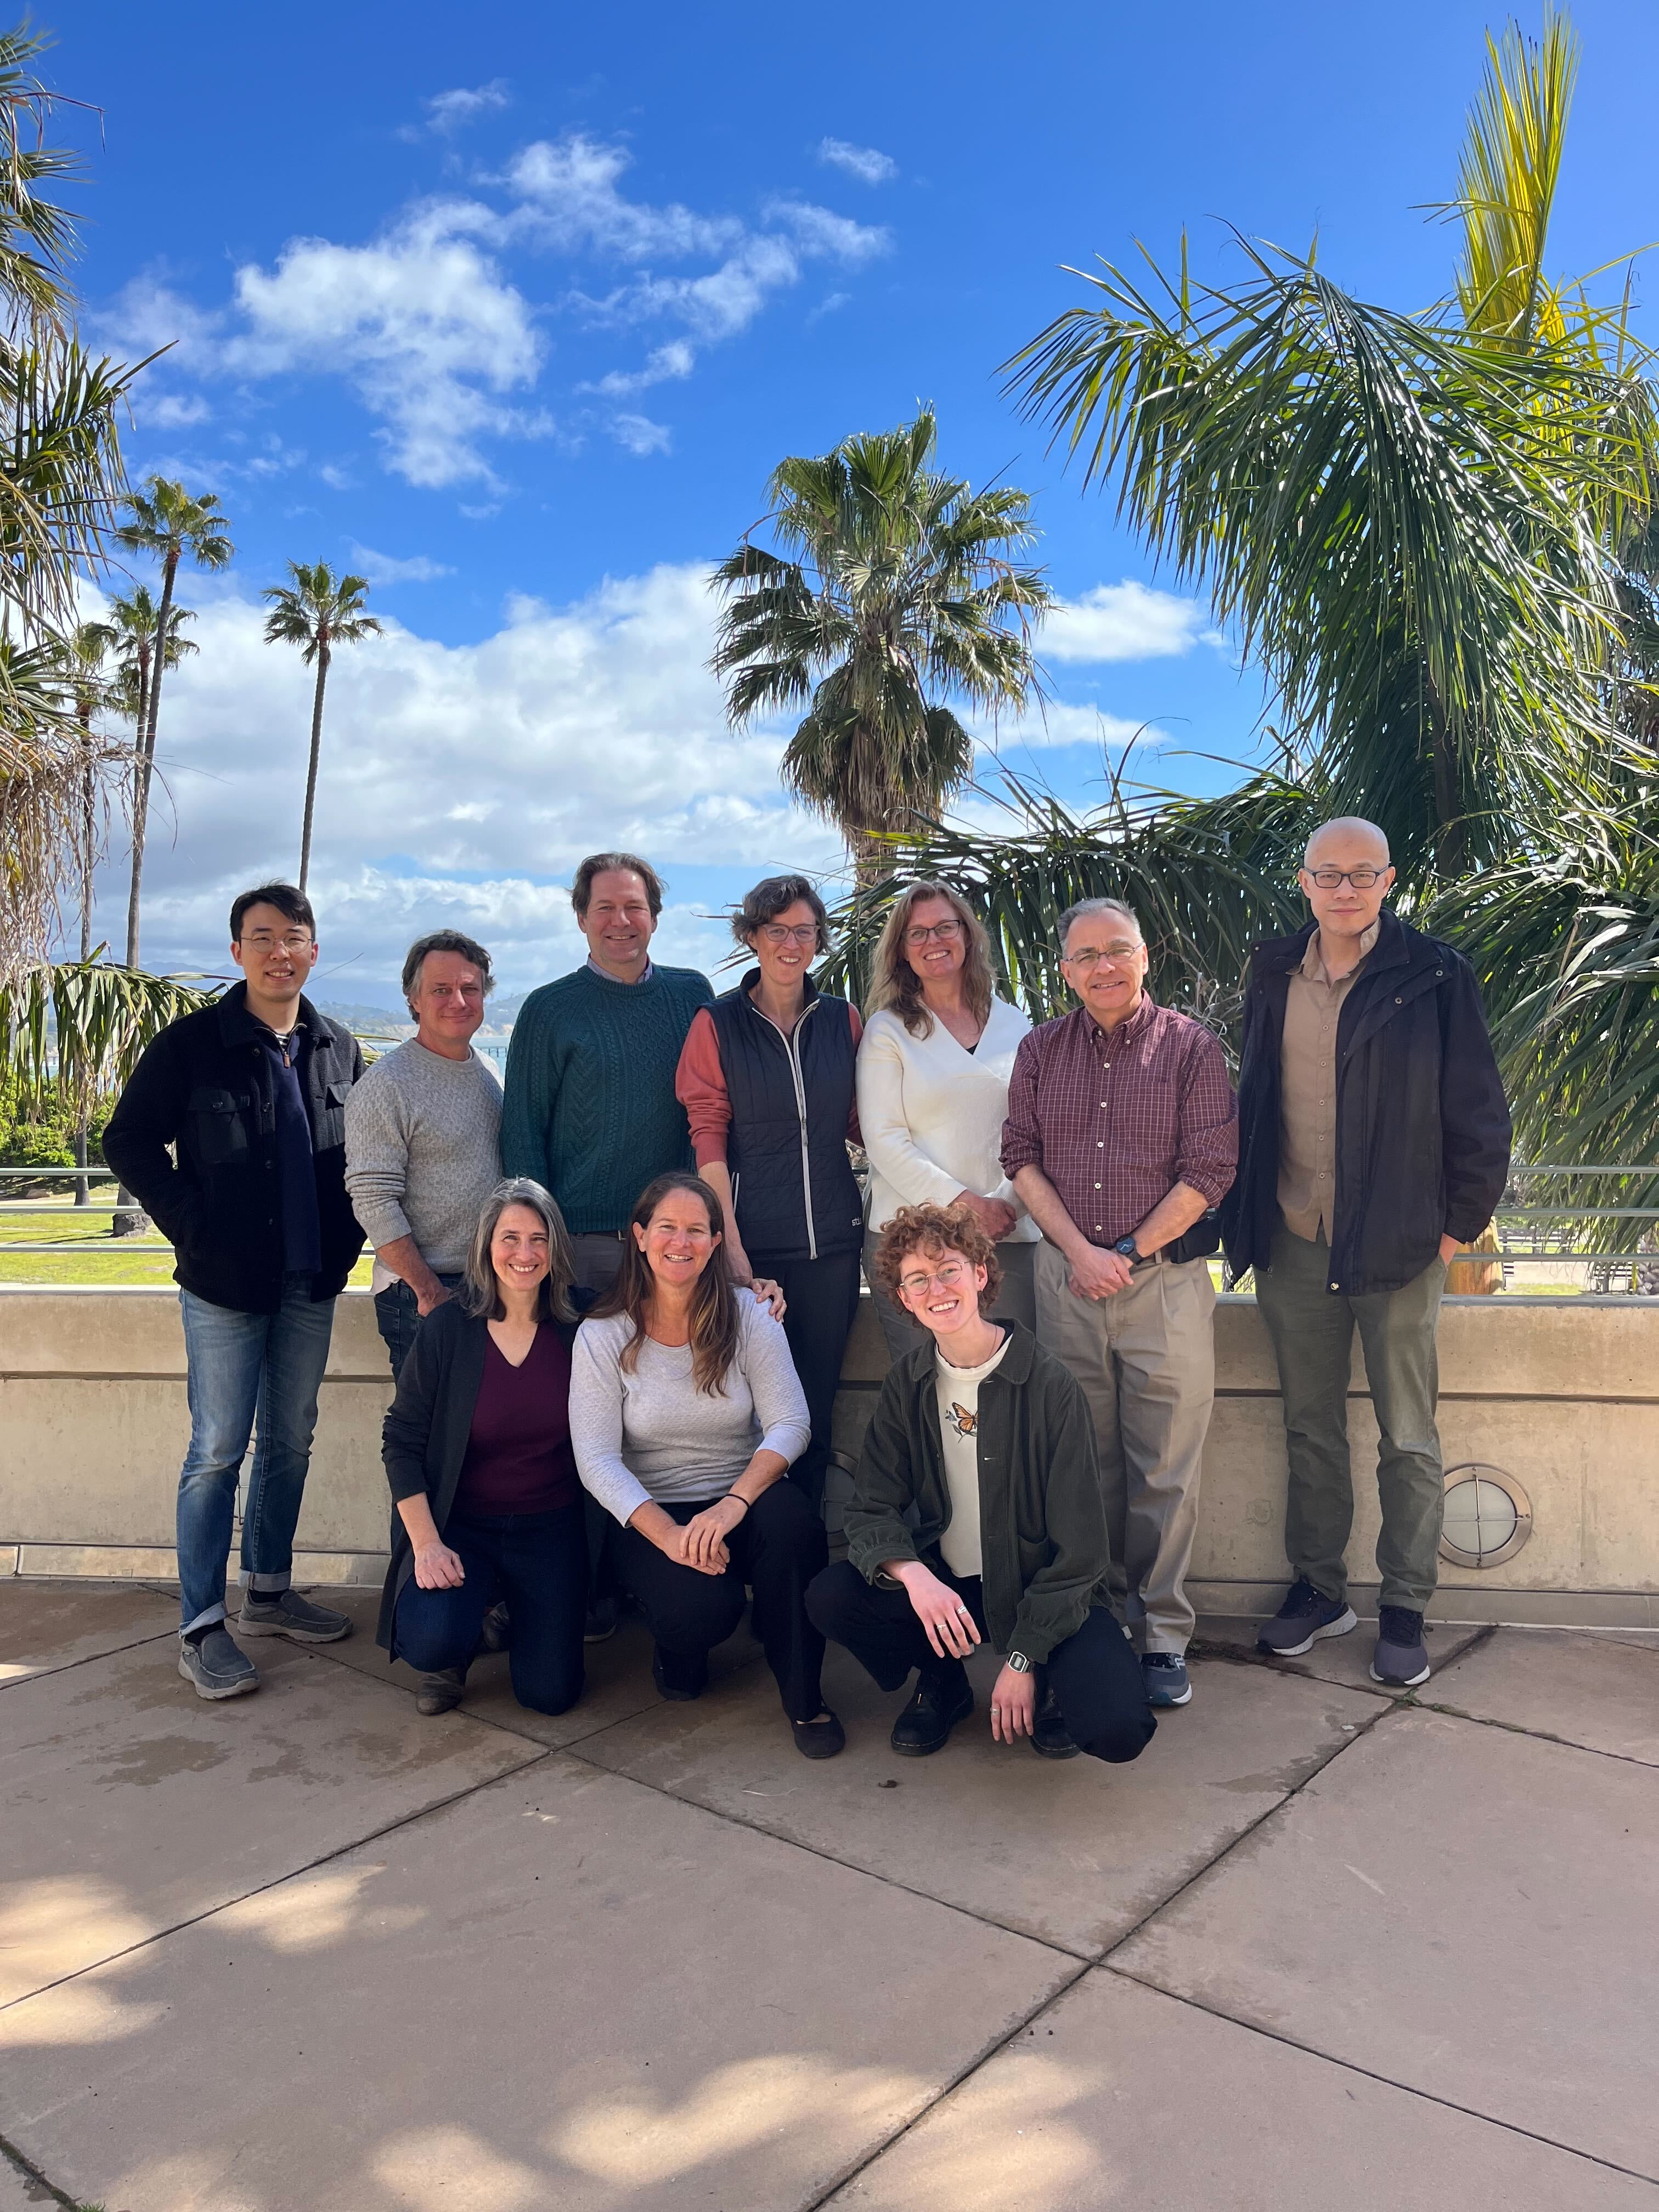 Ten researchers pose in front of palm trees.